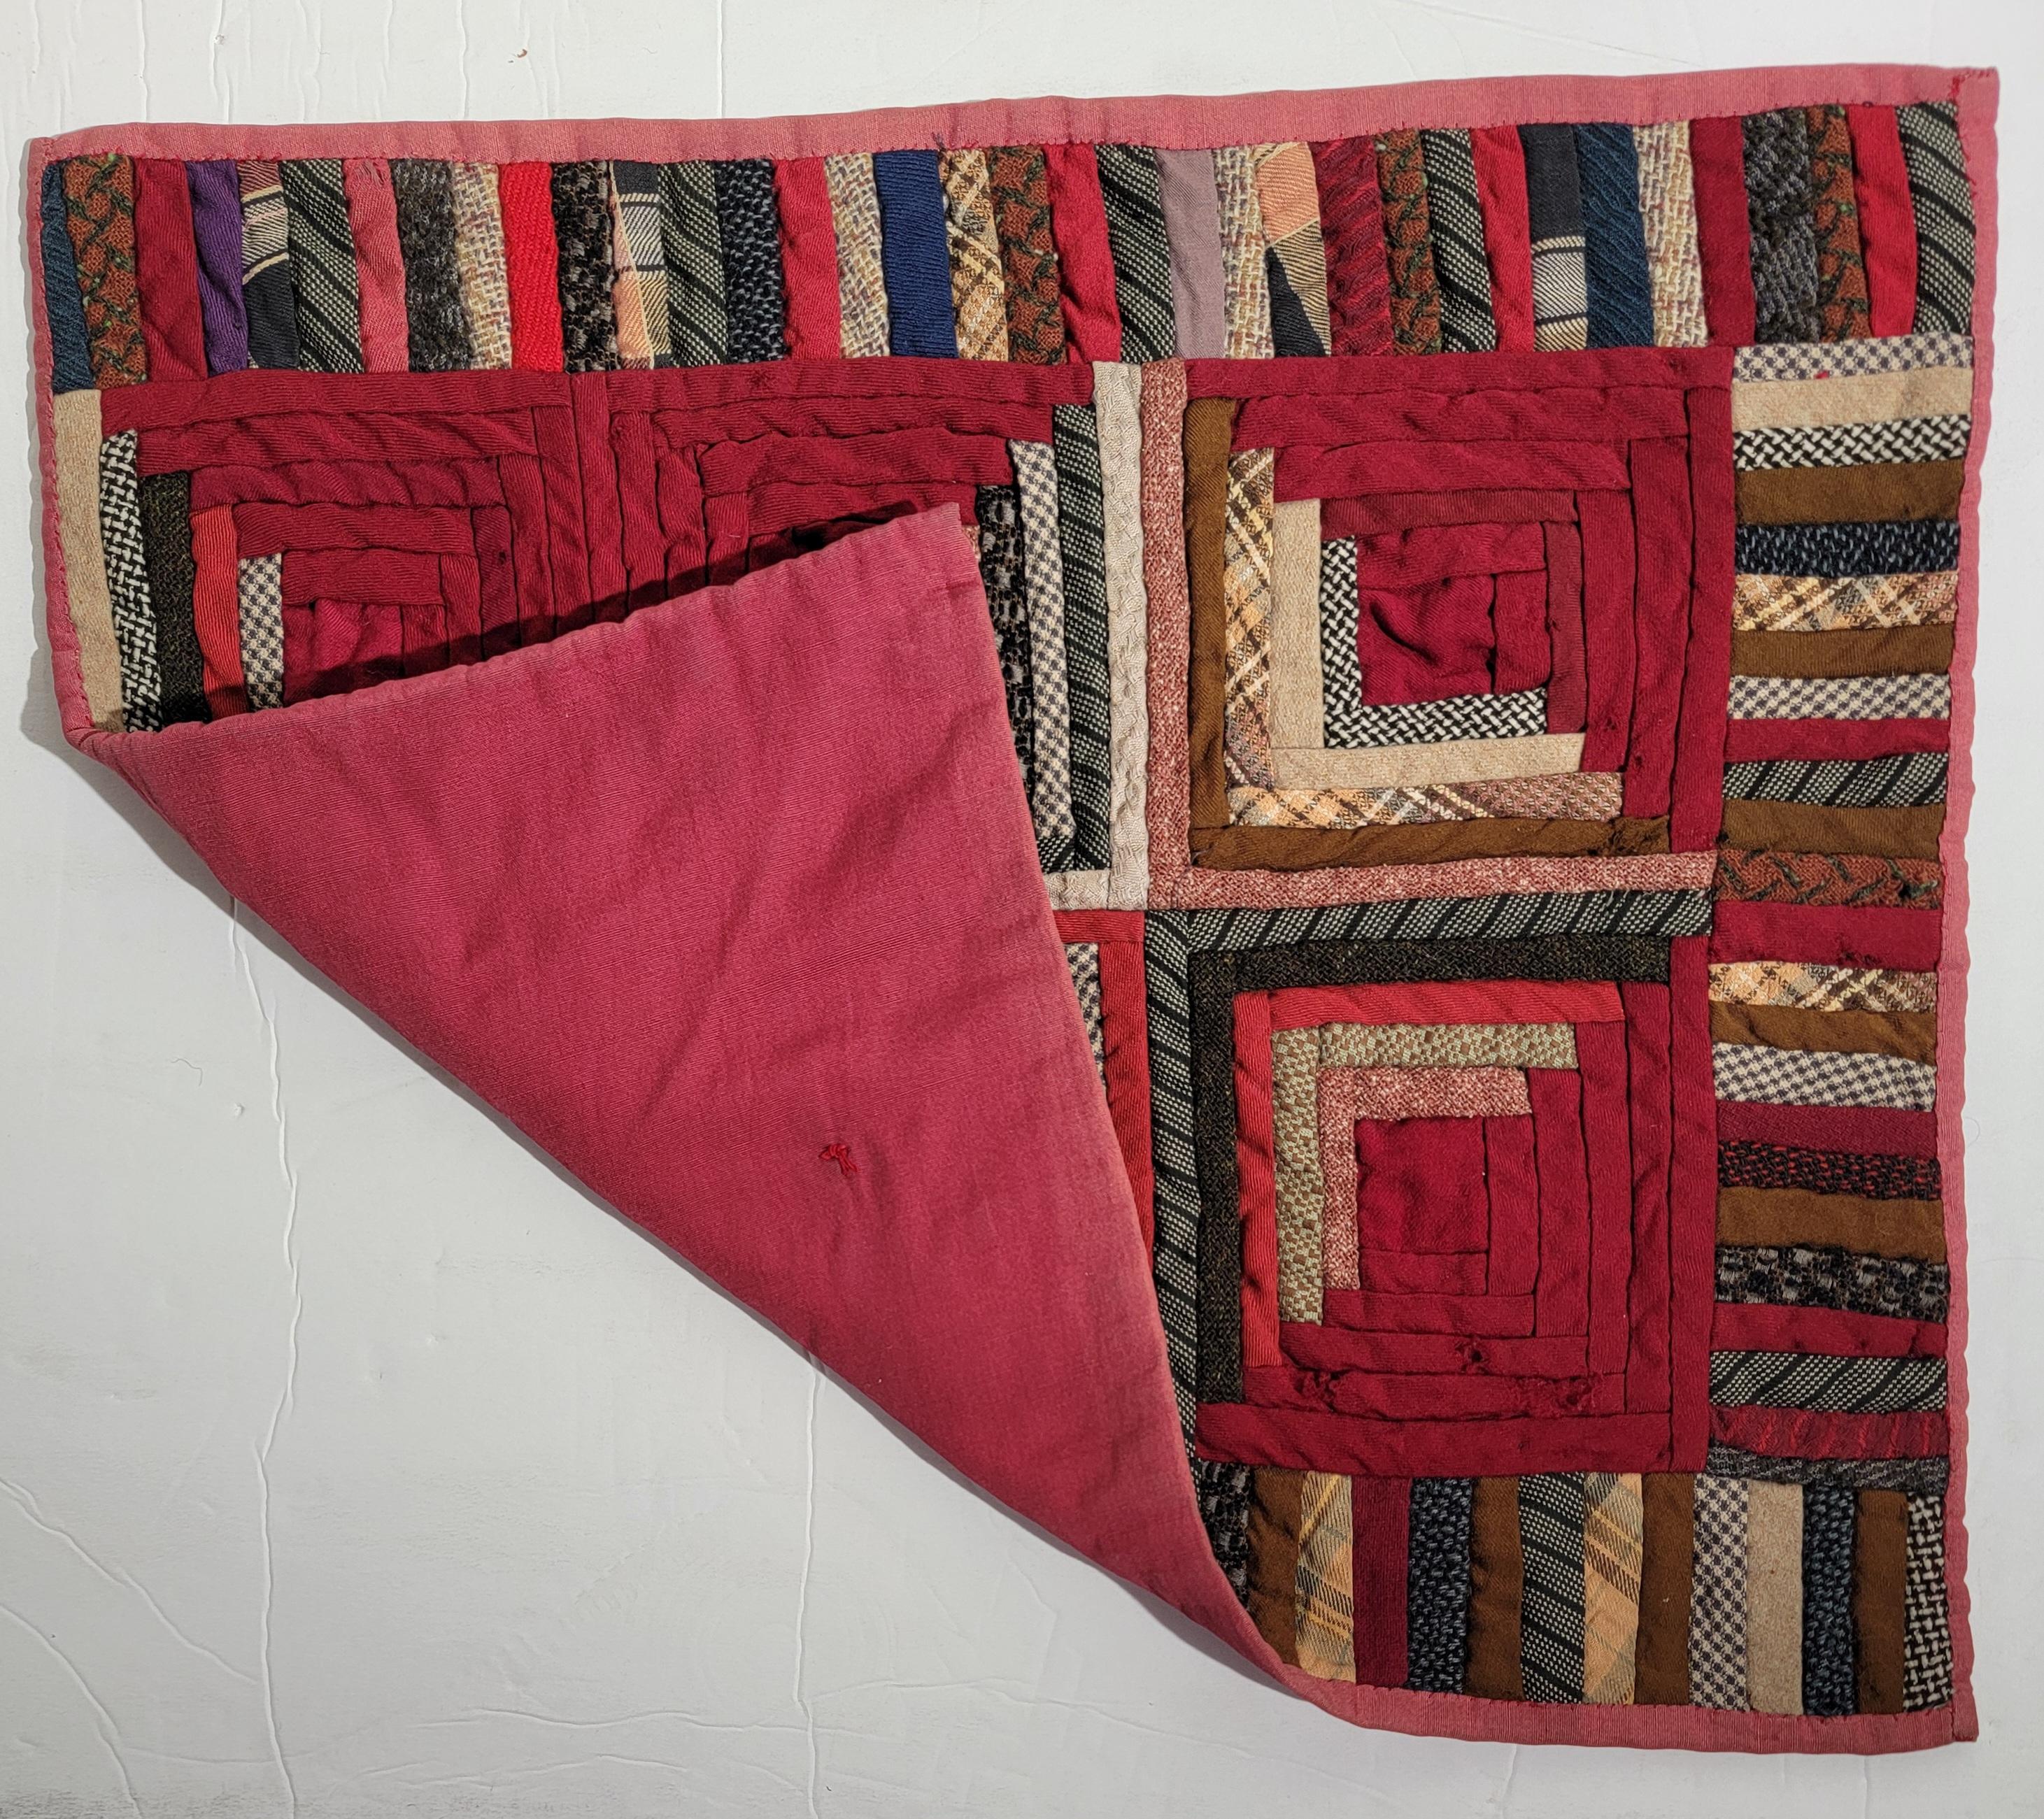 19Thc Wool log cabin doll quilt from Pennsylvania in fine condition.This comes from a private collection.